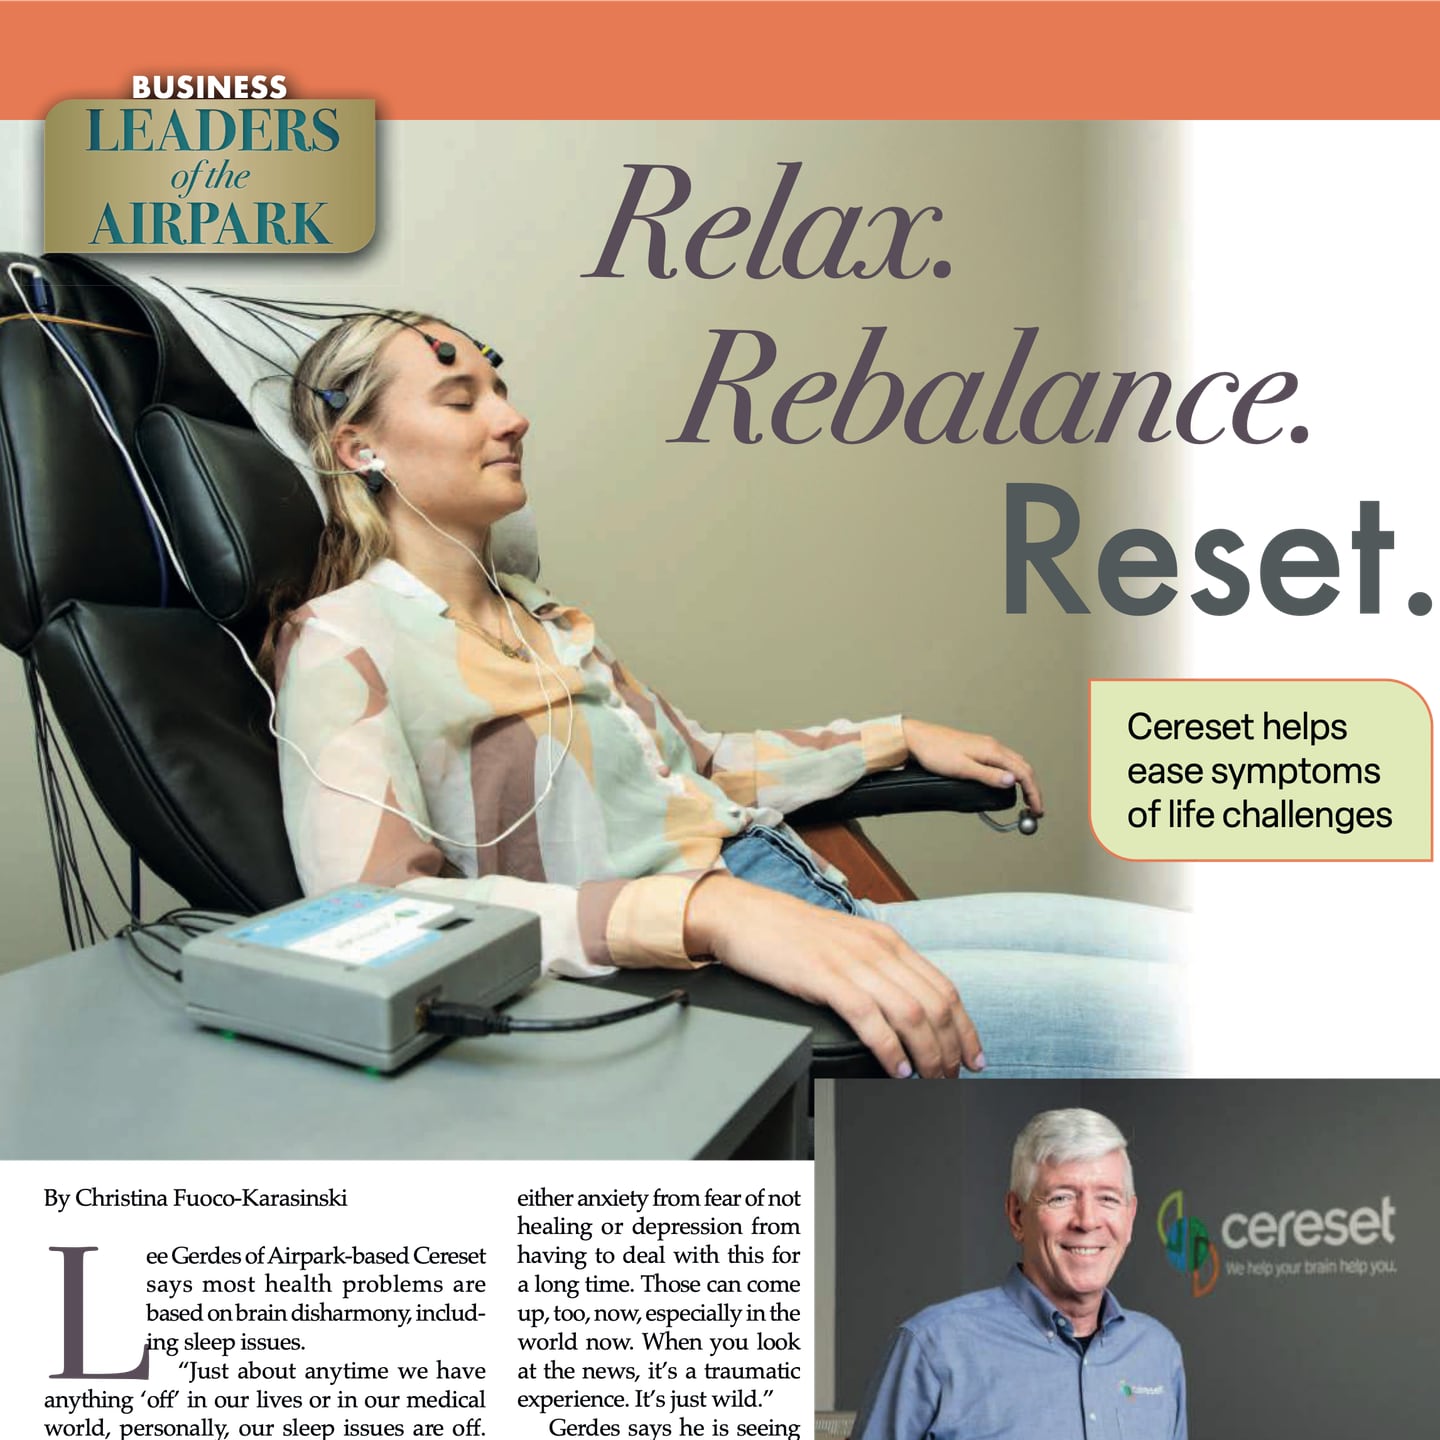 Relax. Rebalance. Reset. – Cereset helps ease symptoms of life challenges.